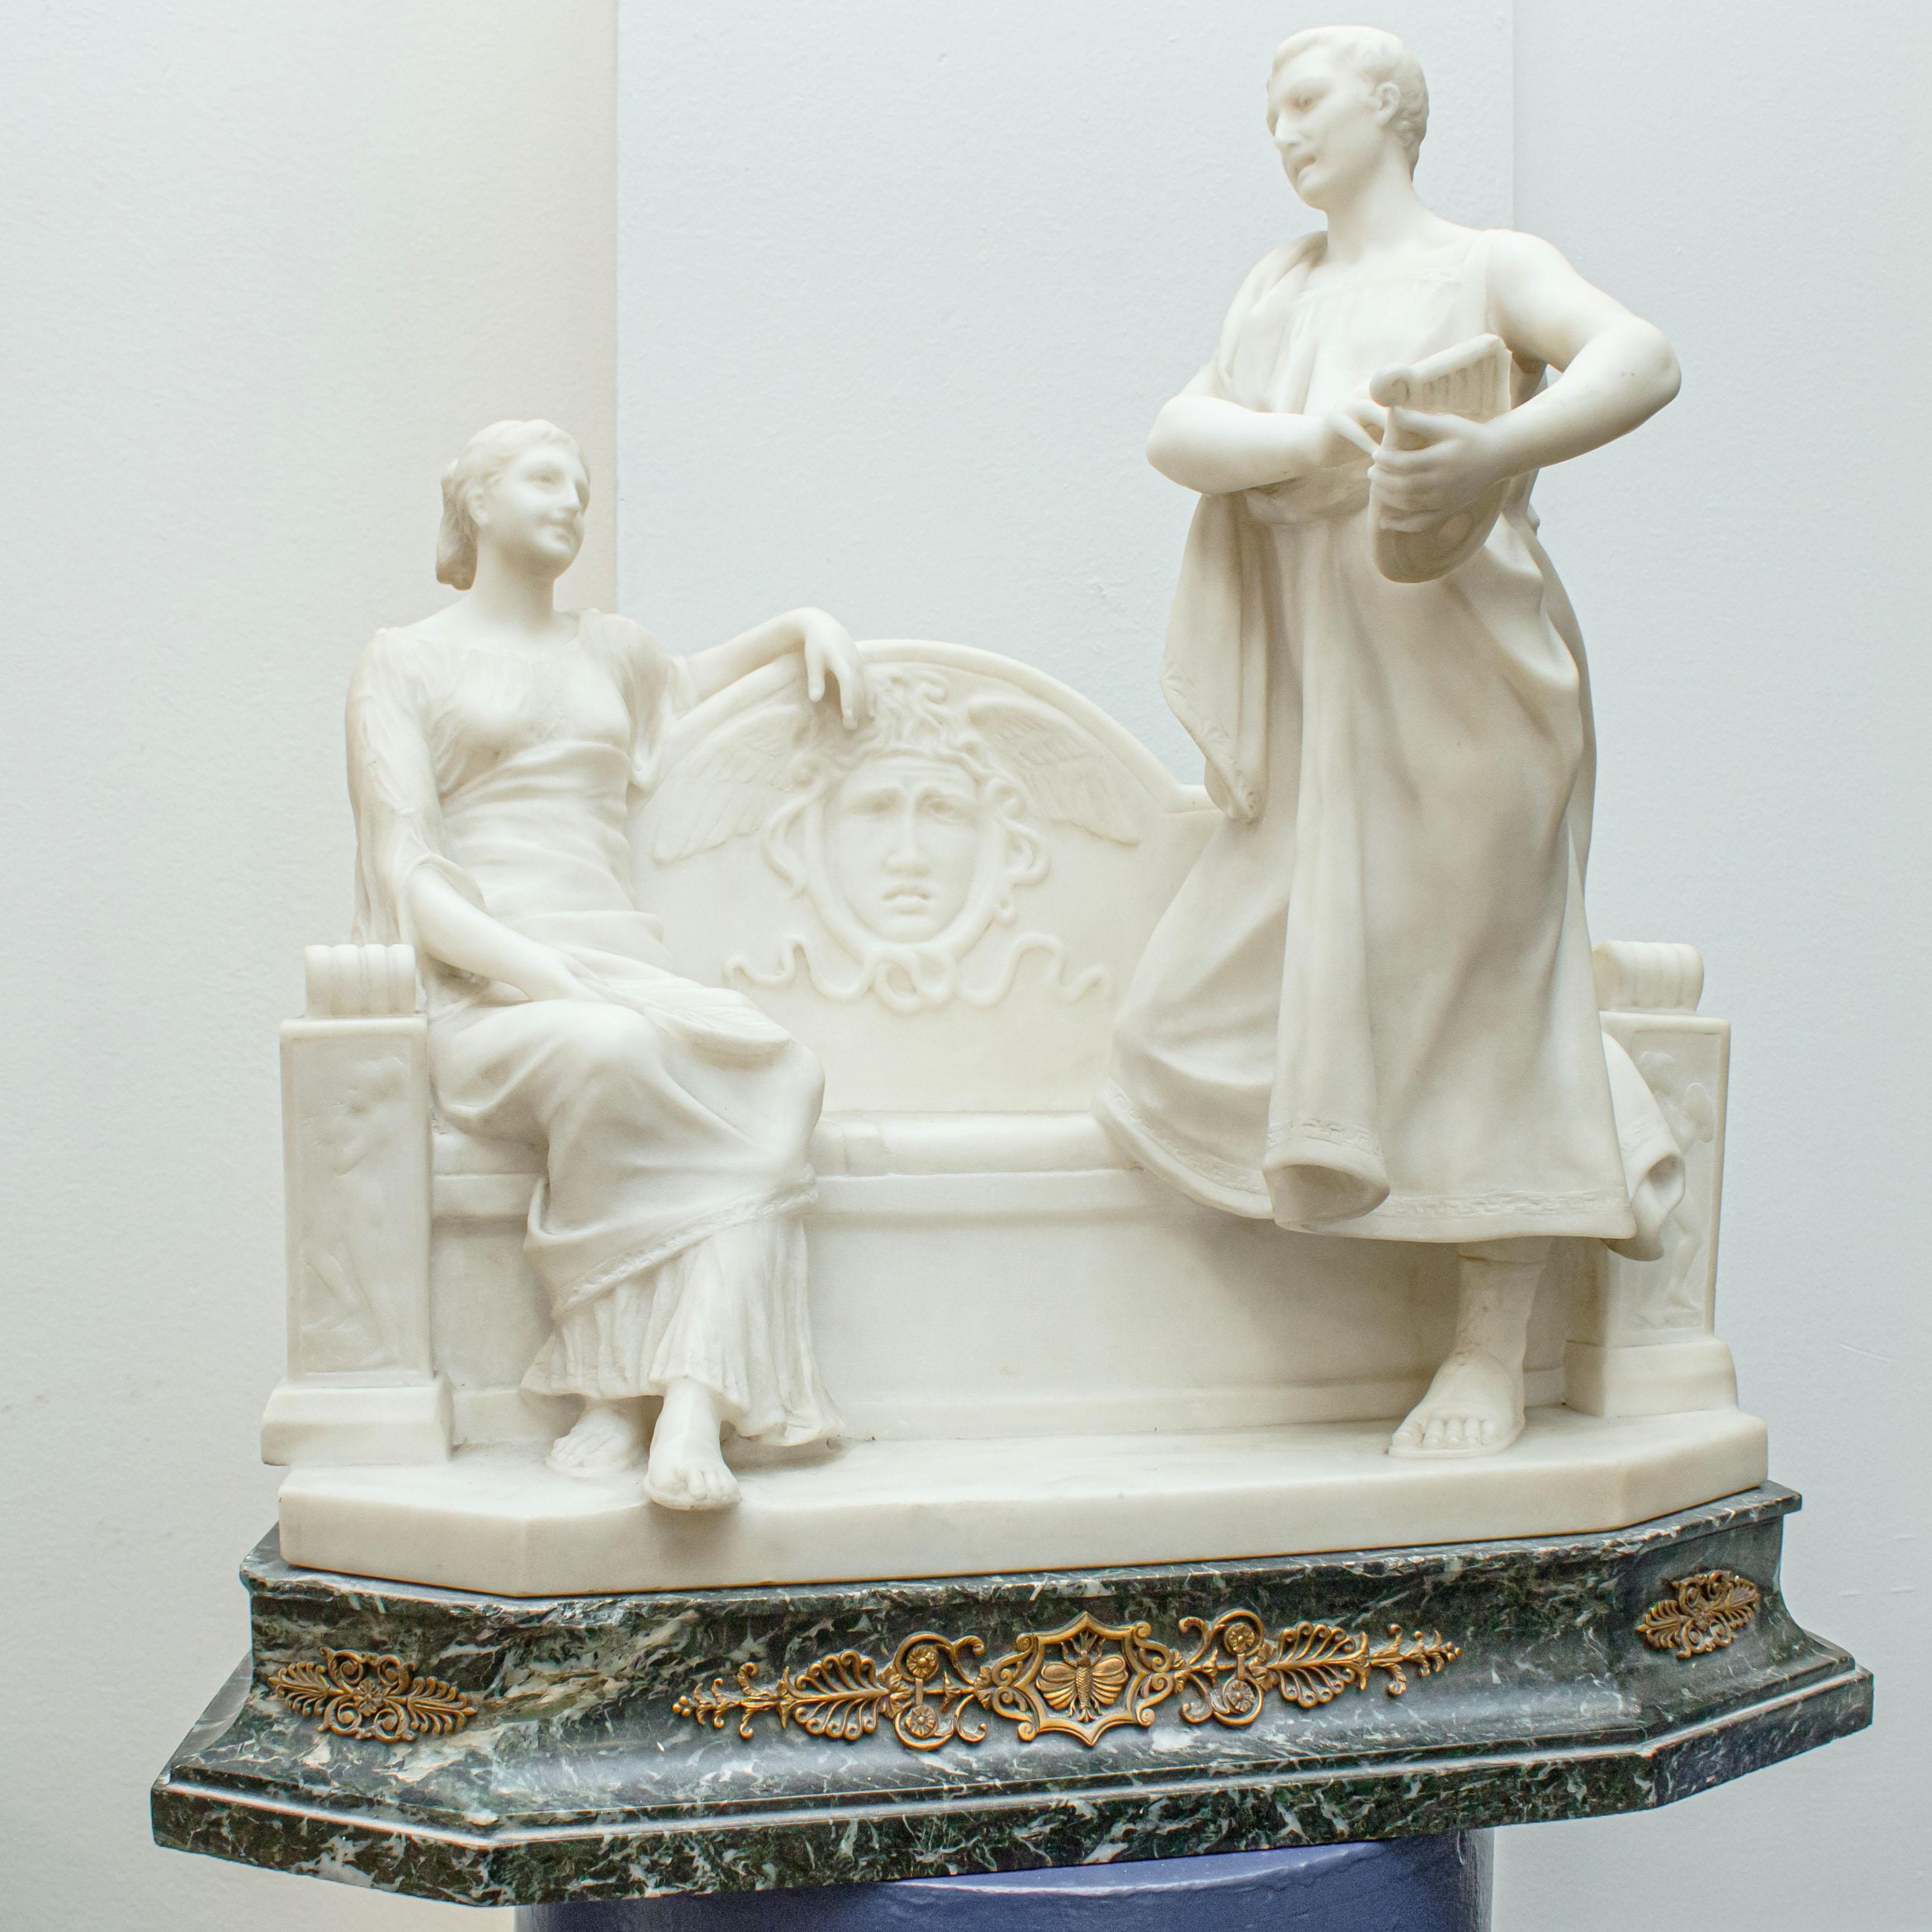 Early 20th century
Gallant scene with citadel 
White marble and green marble from the Alps, cm 59 x 48 x 29
Signed on the back 